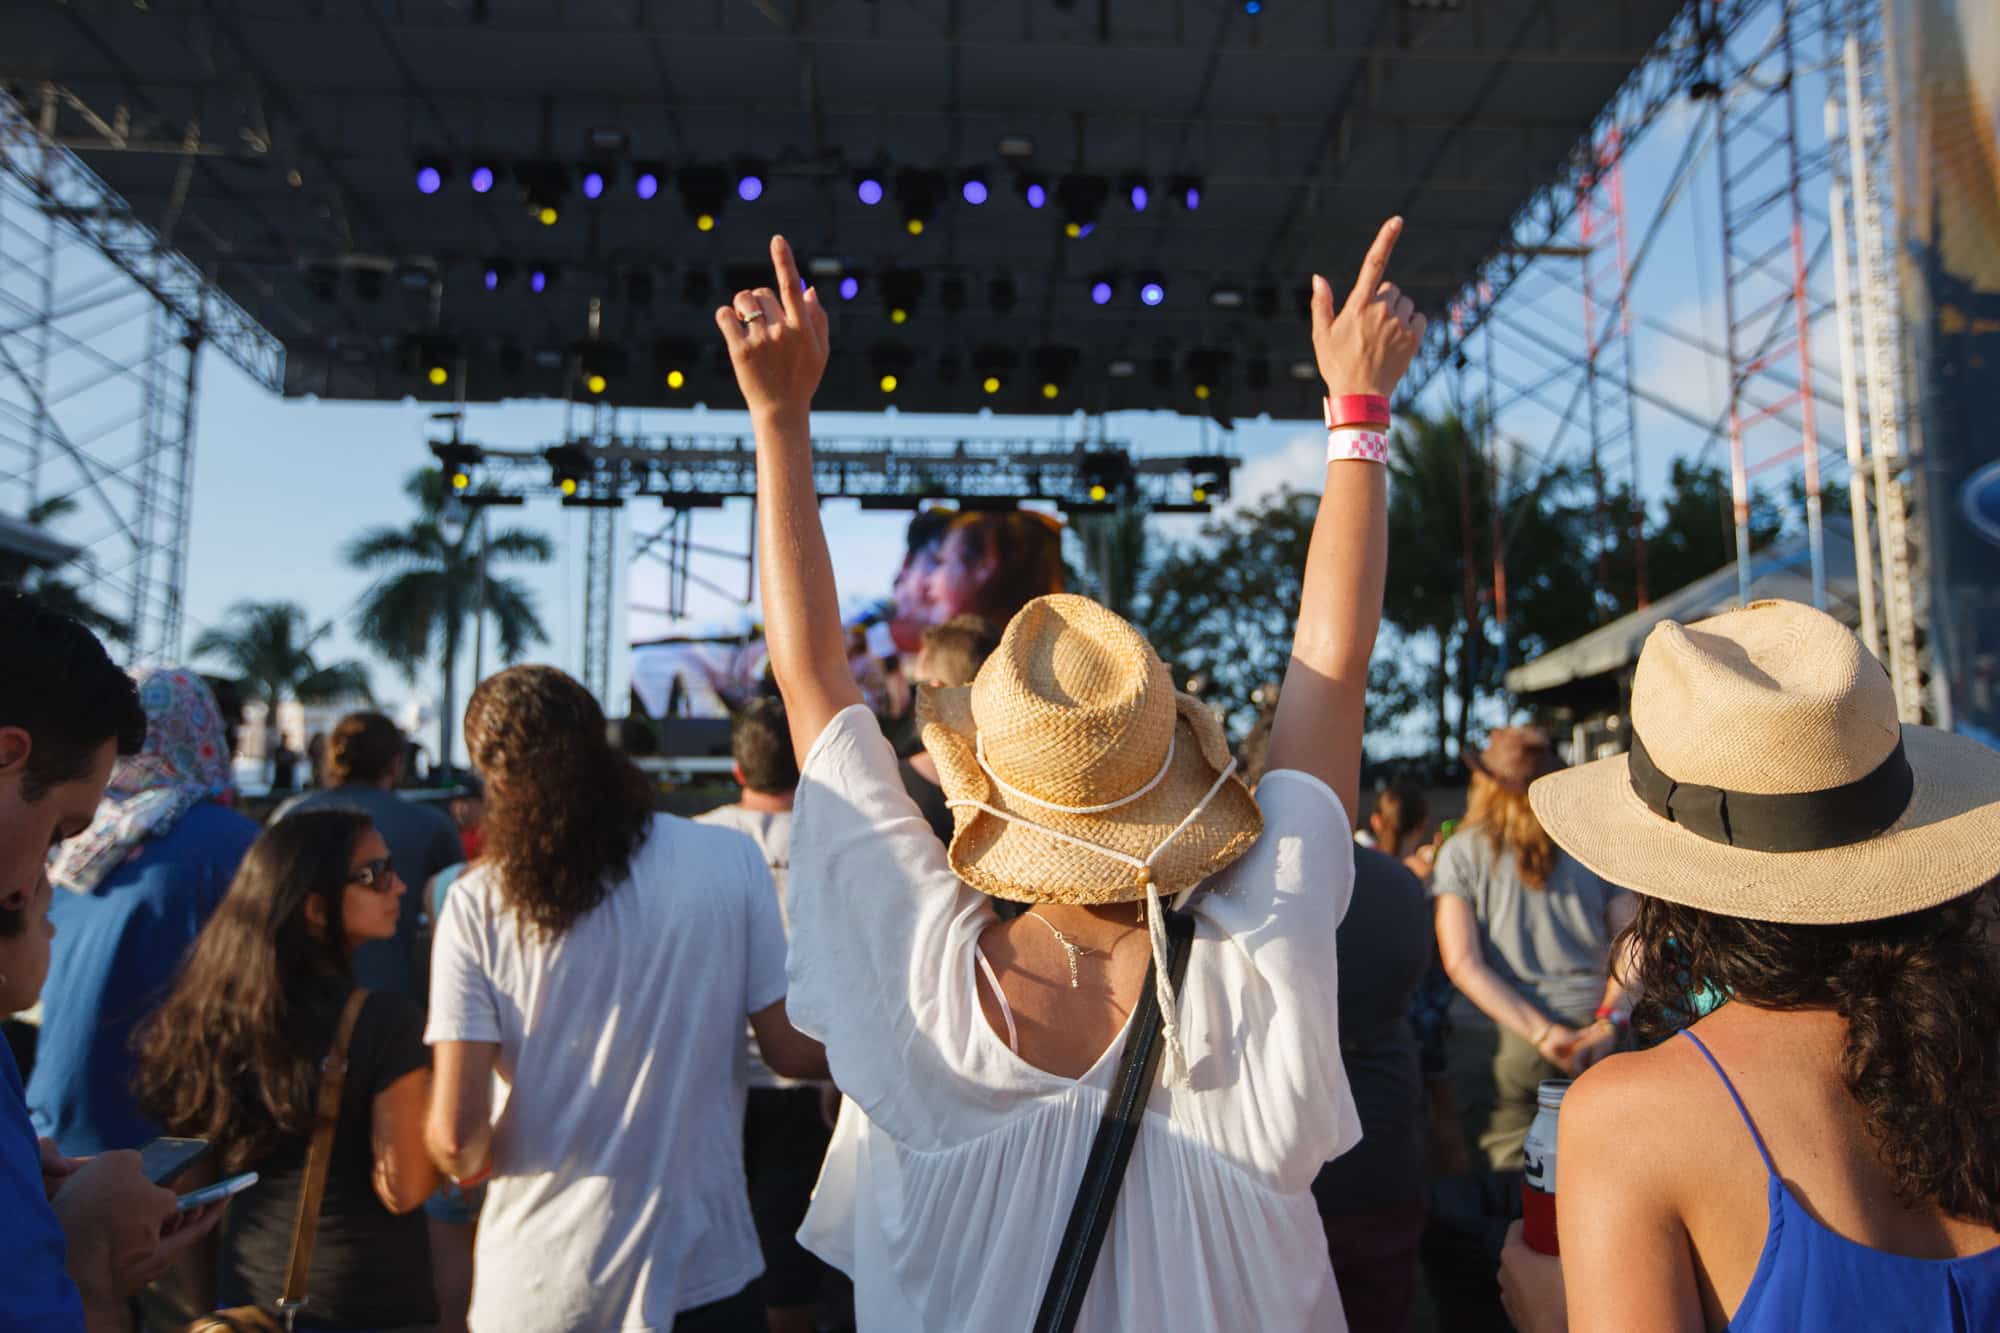 The Ultimate Guide To Sunfest 2019 In West Palm Beach